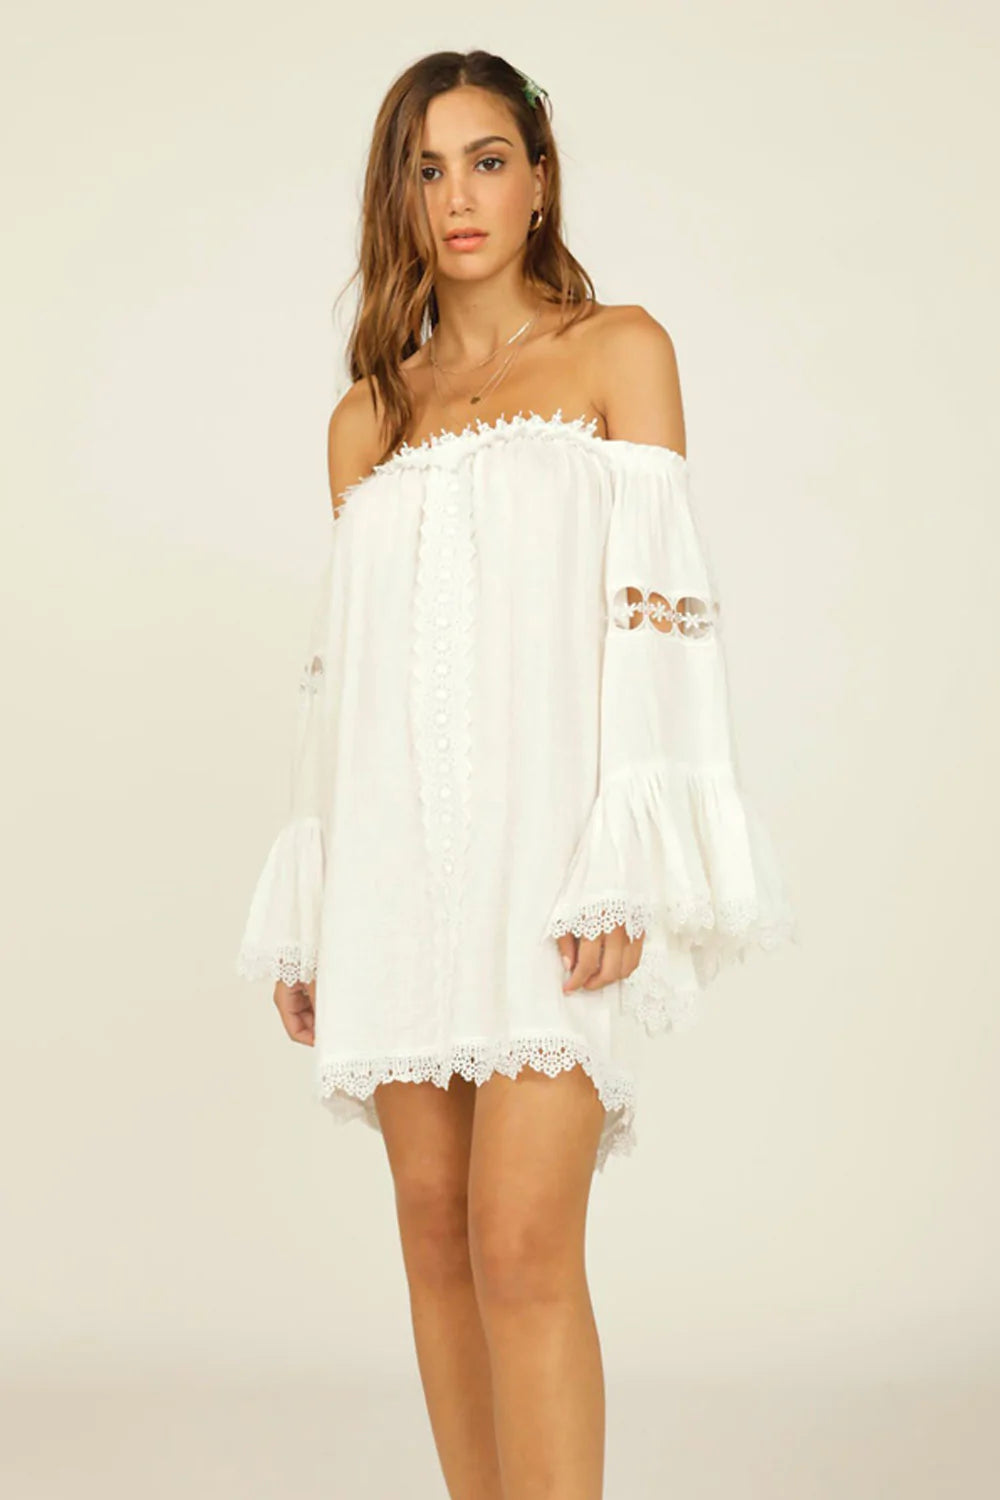 Surf Gypsy Lace Cover Up White